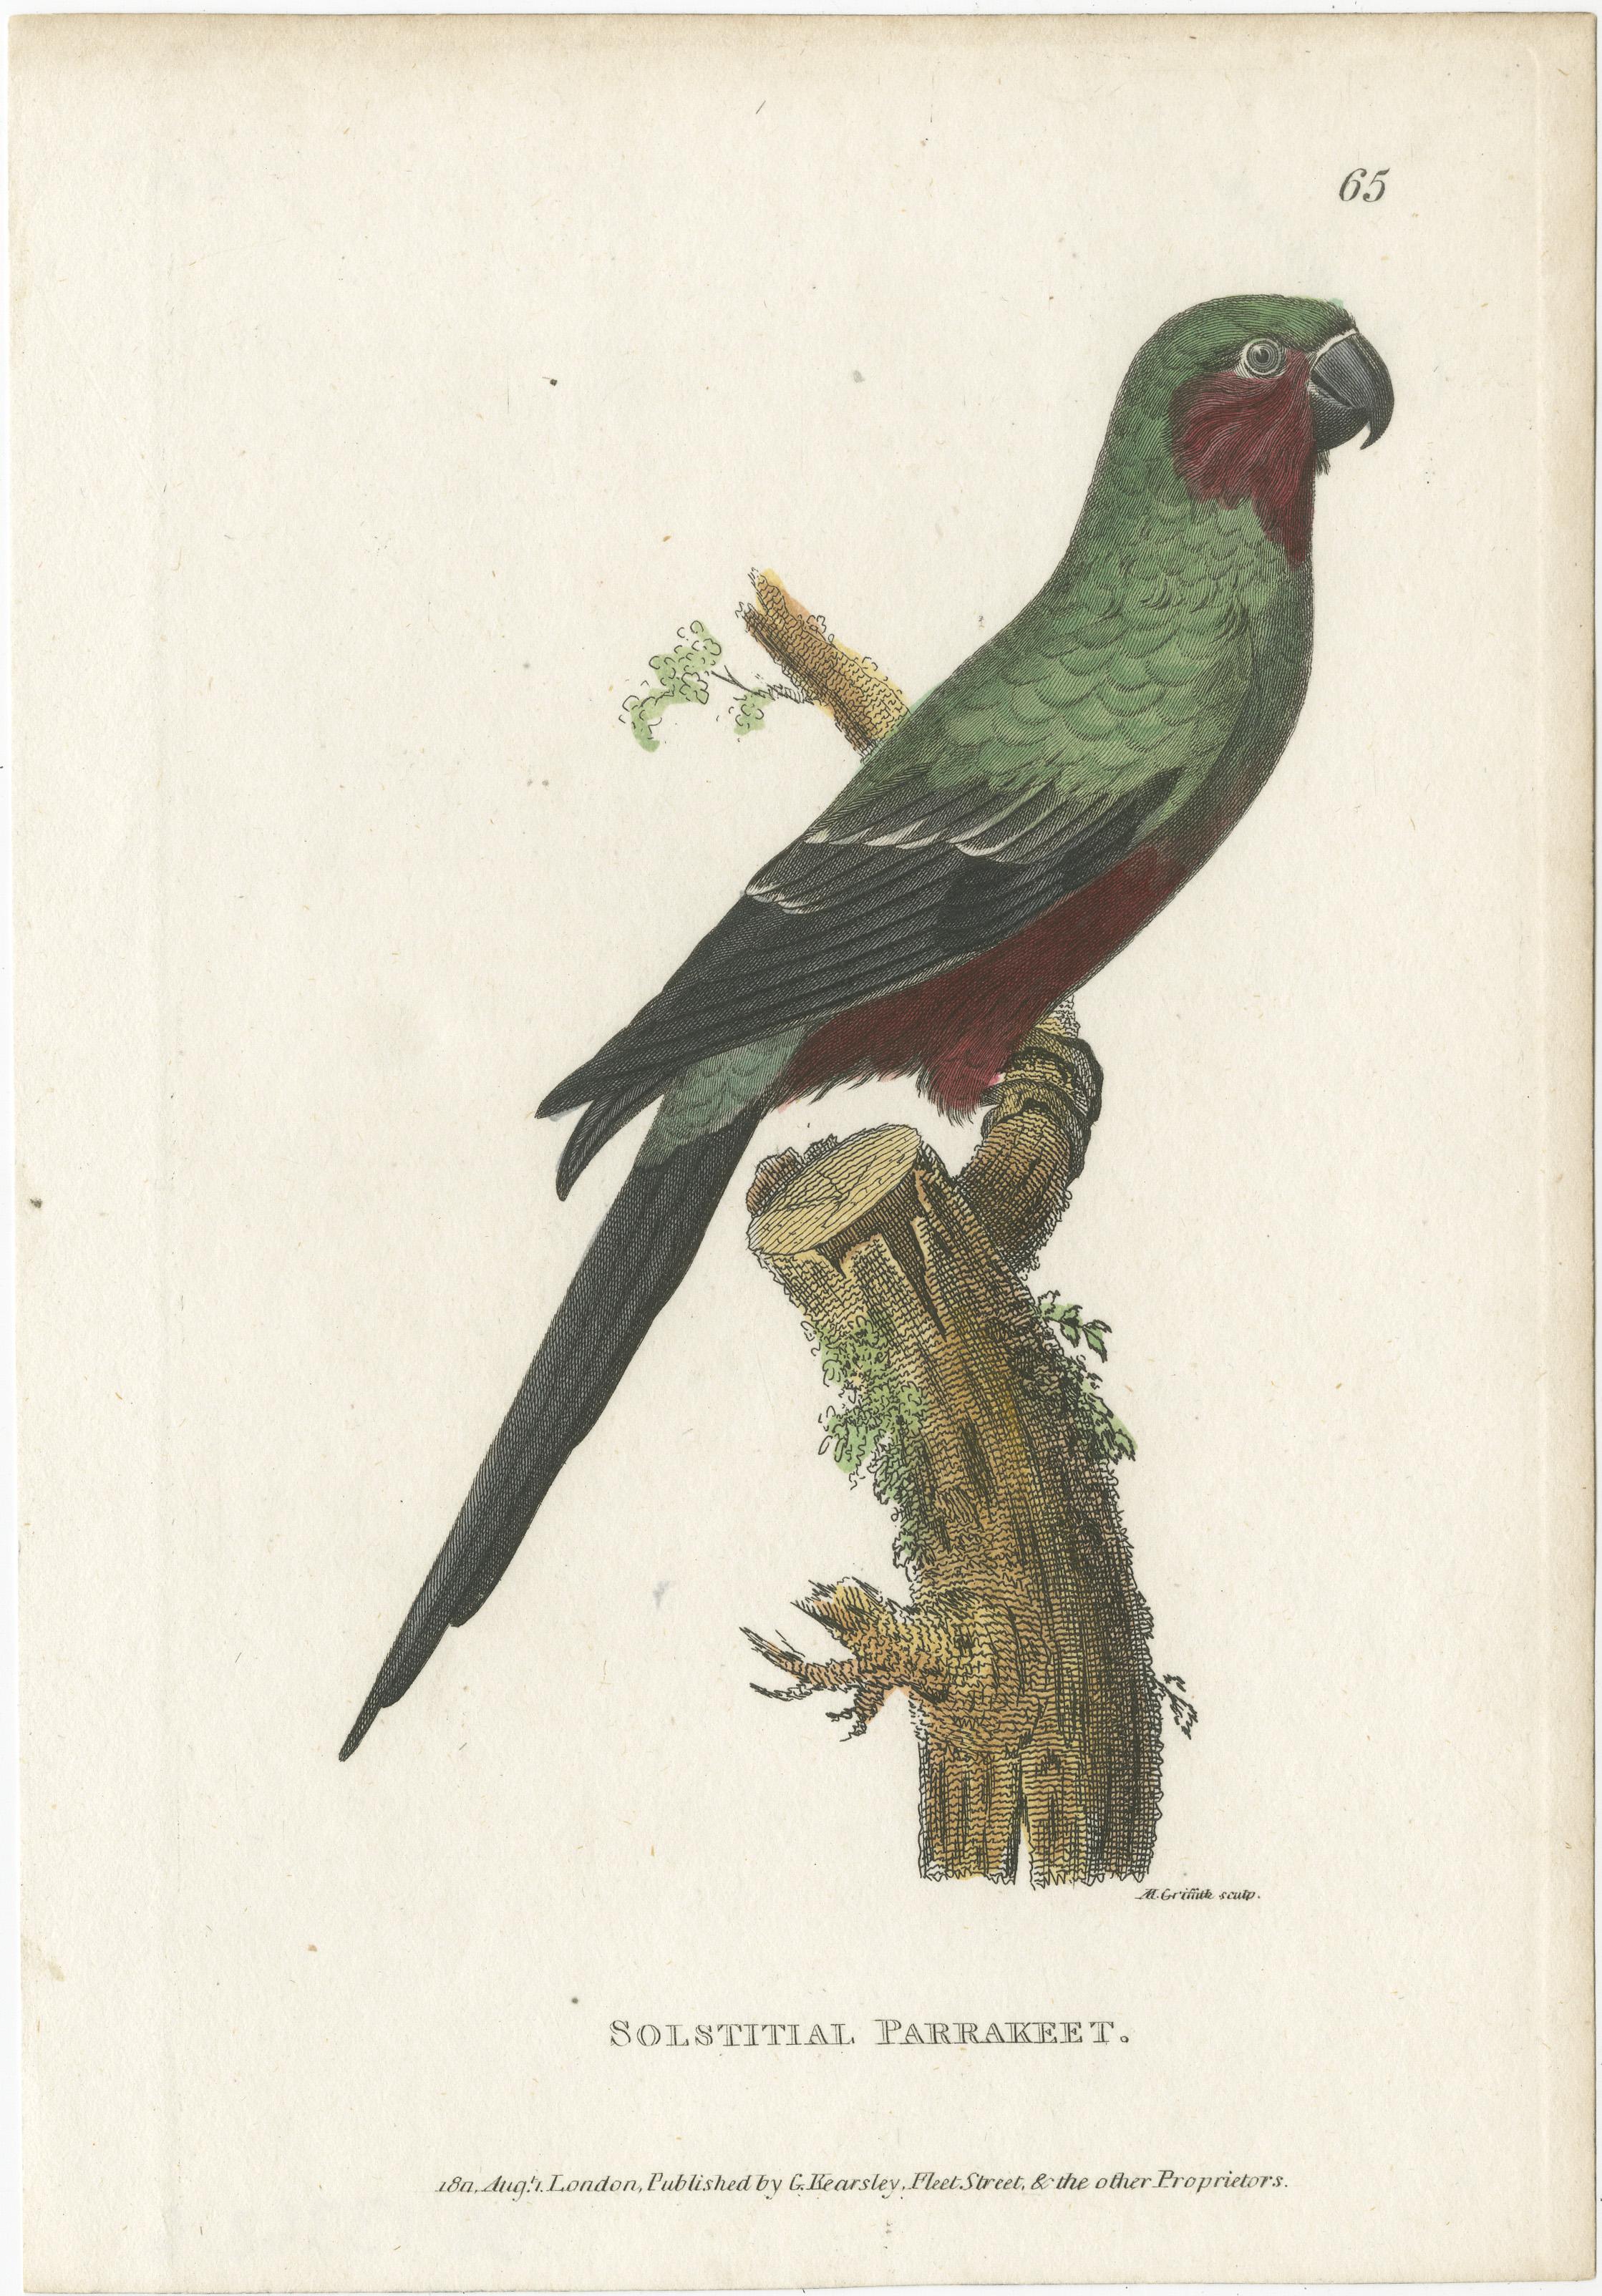 Antique bird print titled 'Solstitial Parrakeet. Hand colored print of a sun parakeet. This print originates from 'Systematic Natural History'. Printed for G. Kearsley, 1800-1826.